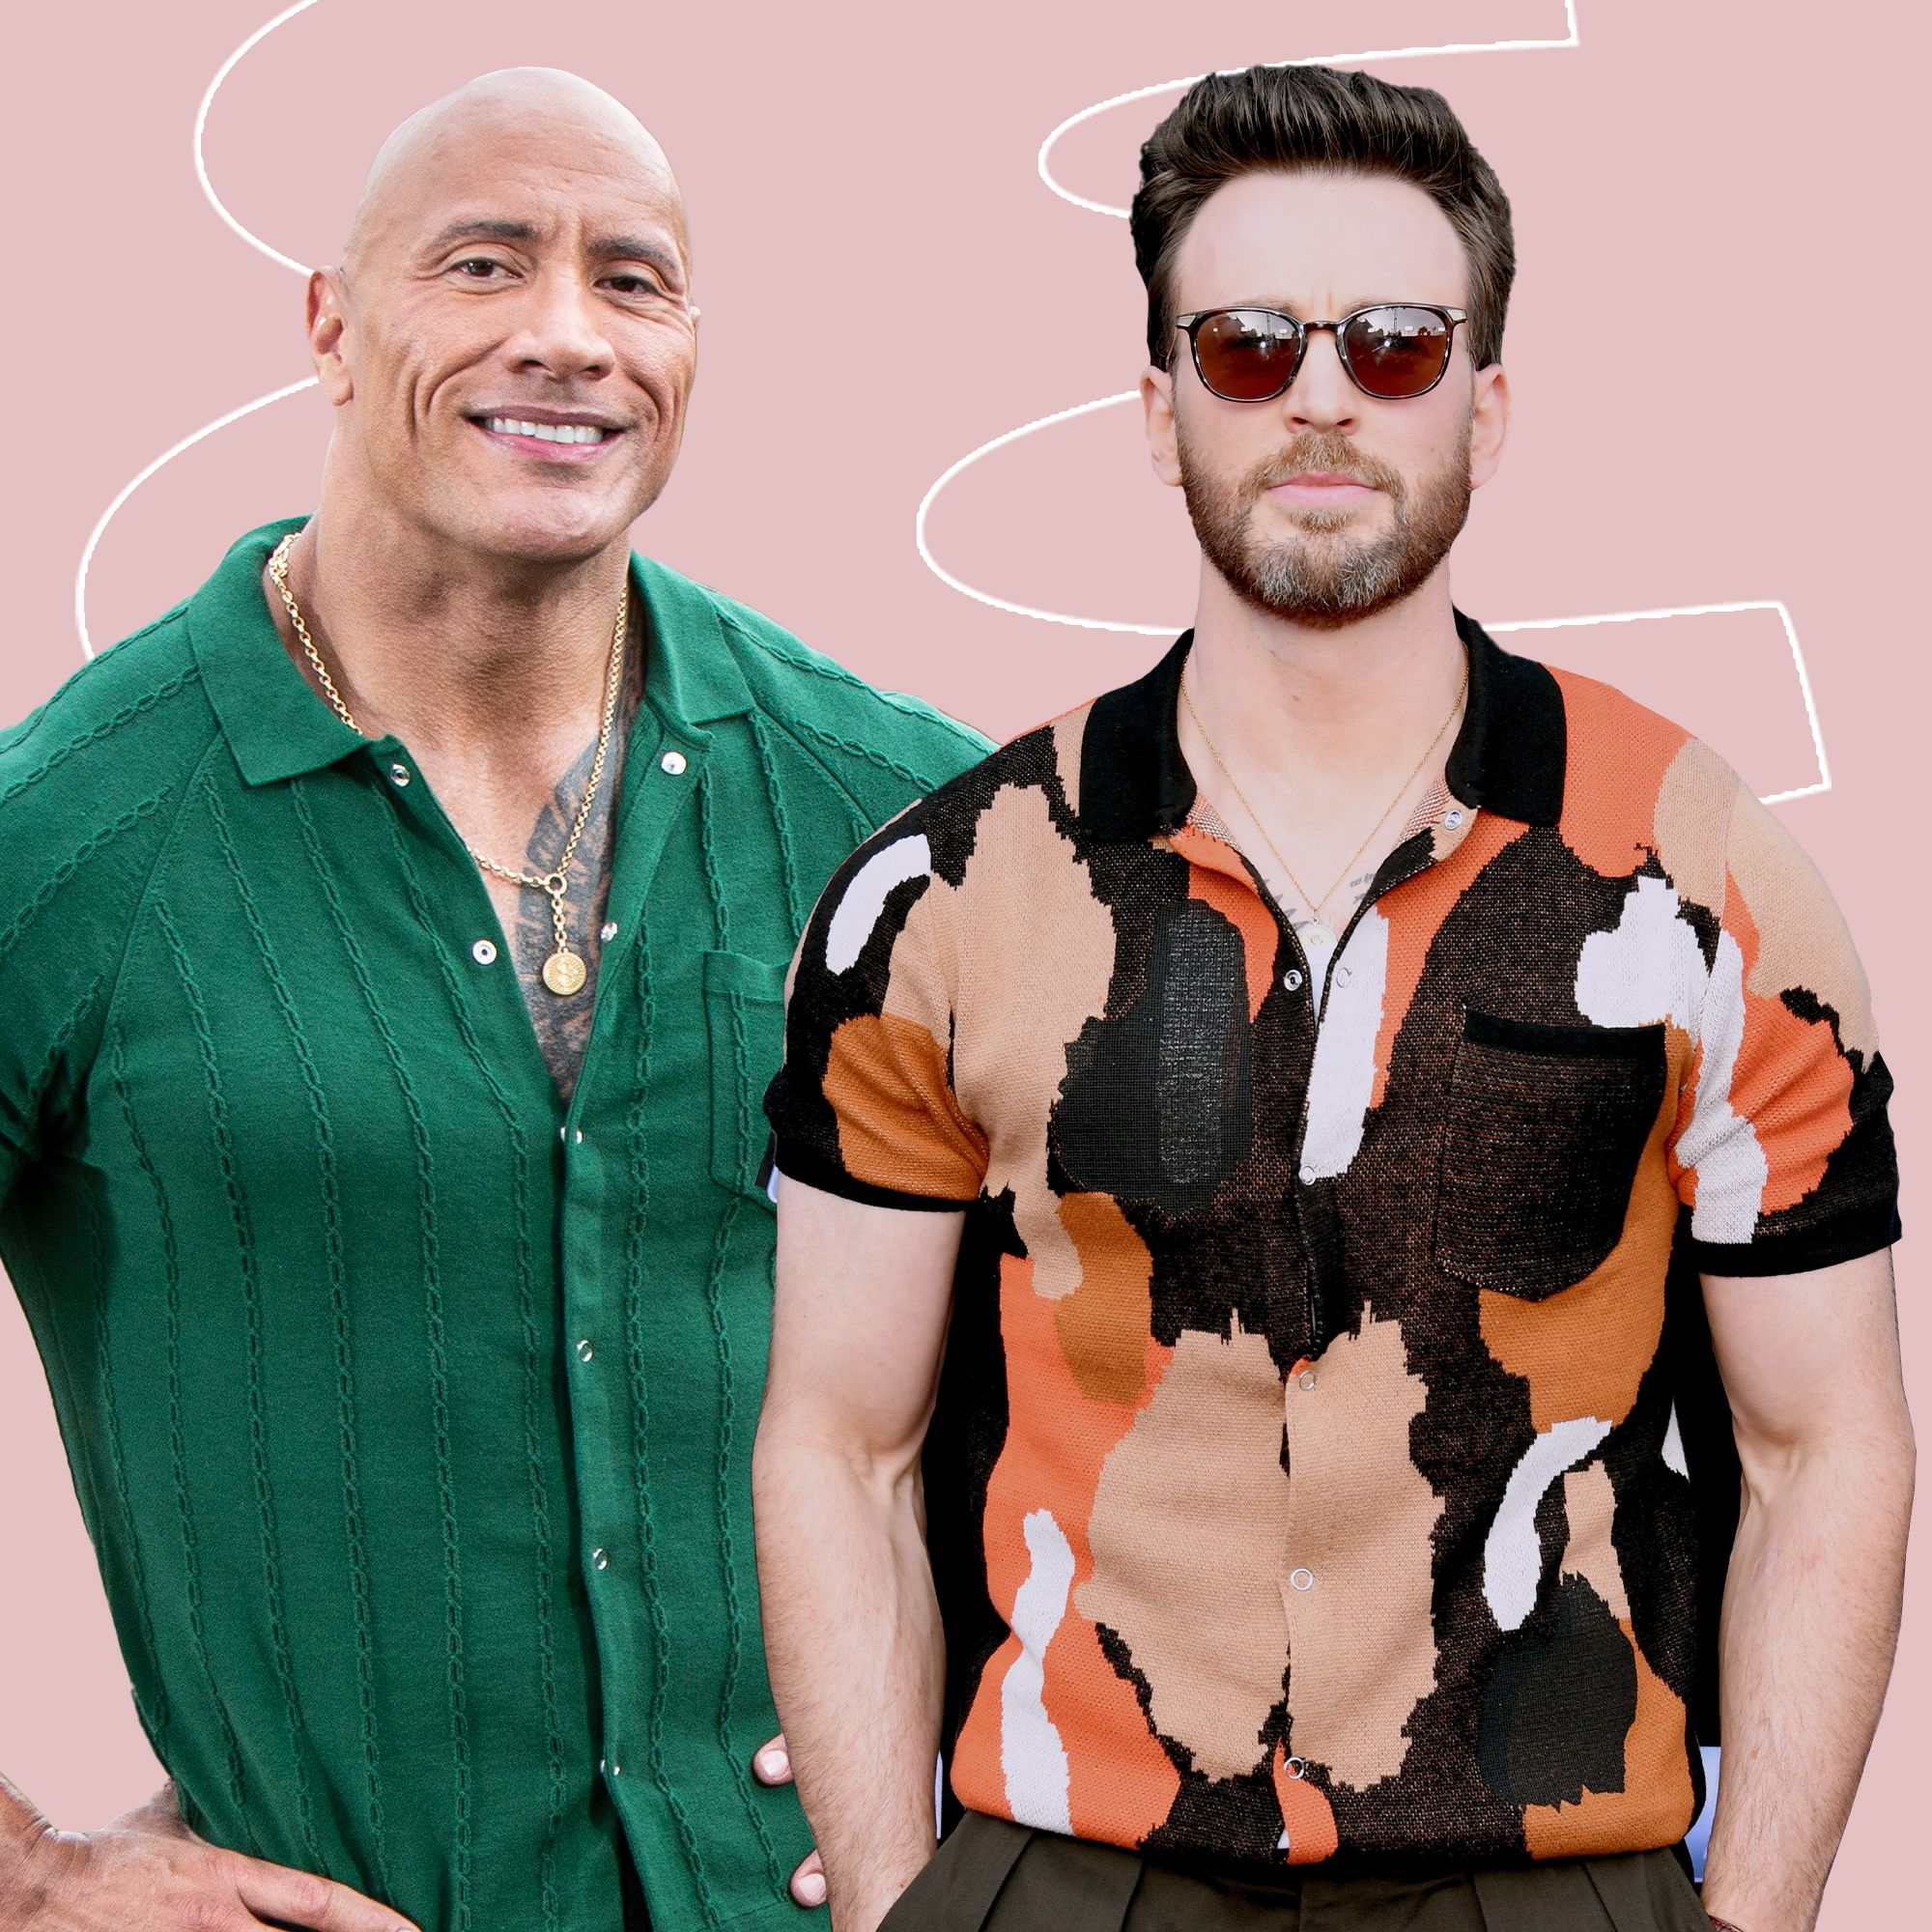 Where to Find Chris Evans, Kit Harington, and The Rock's New Favorite Polo